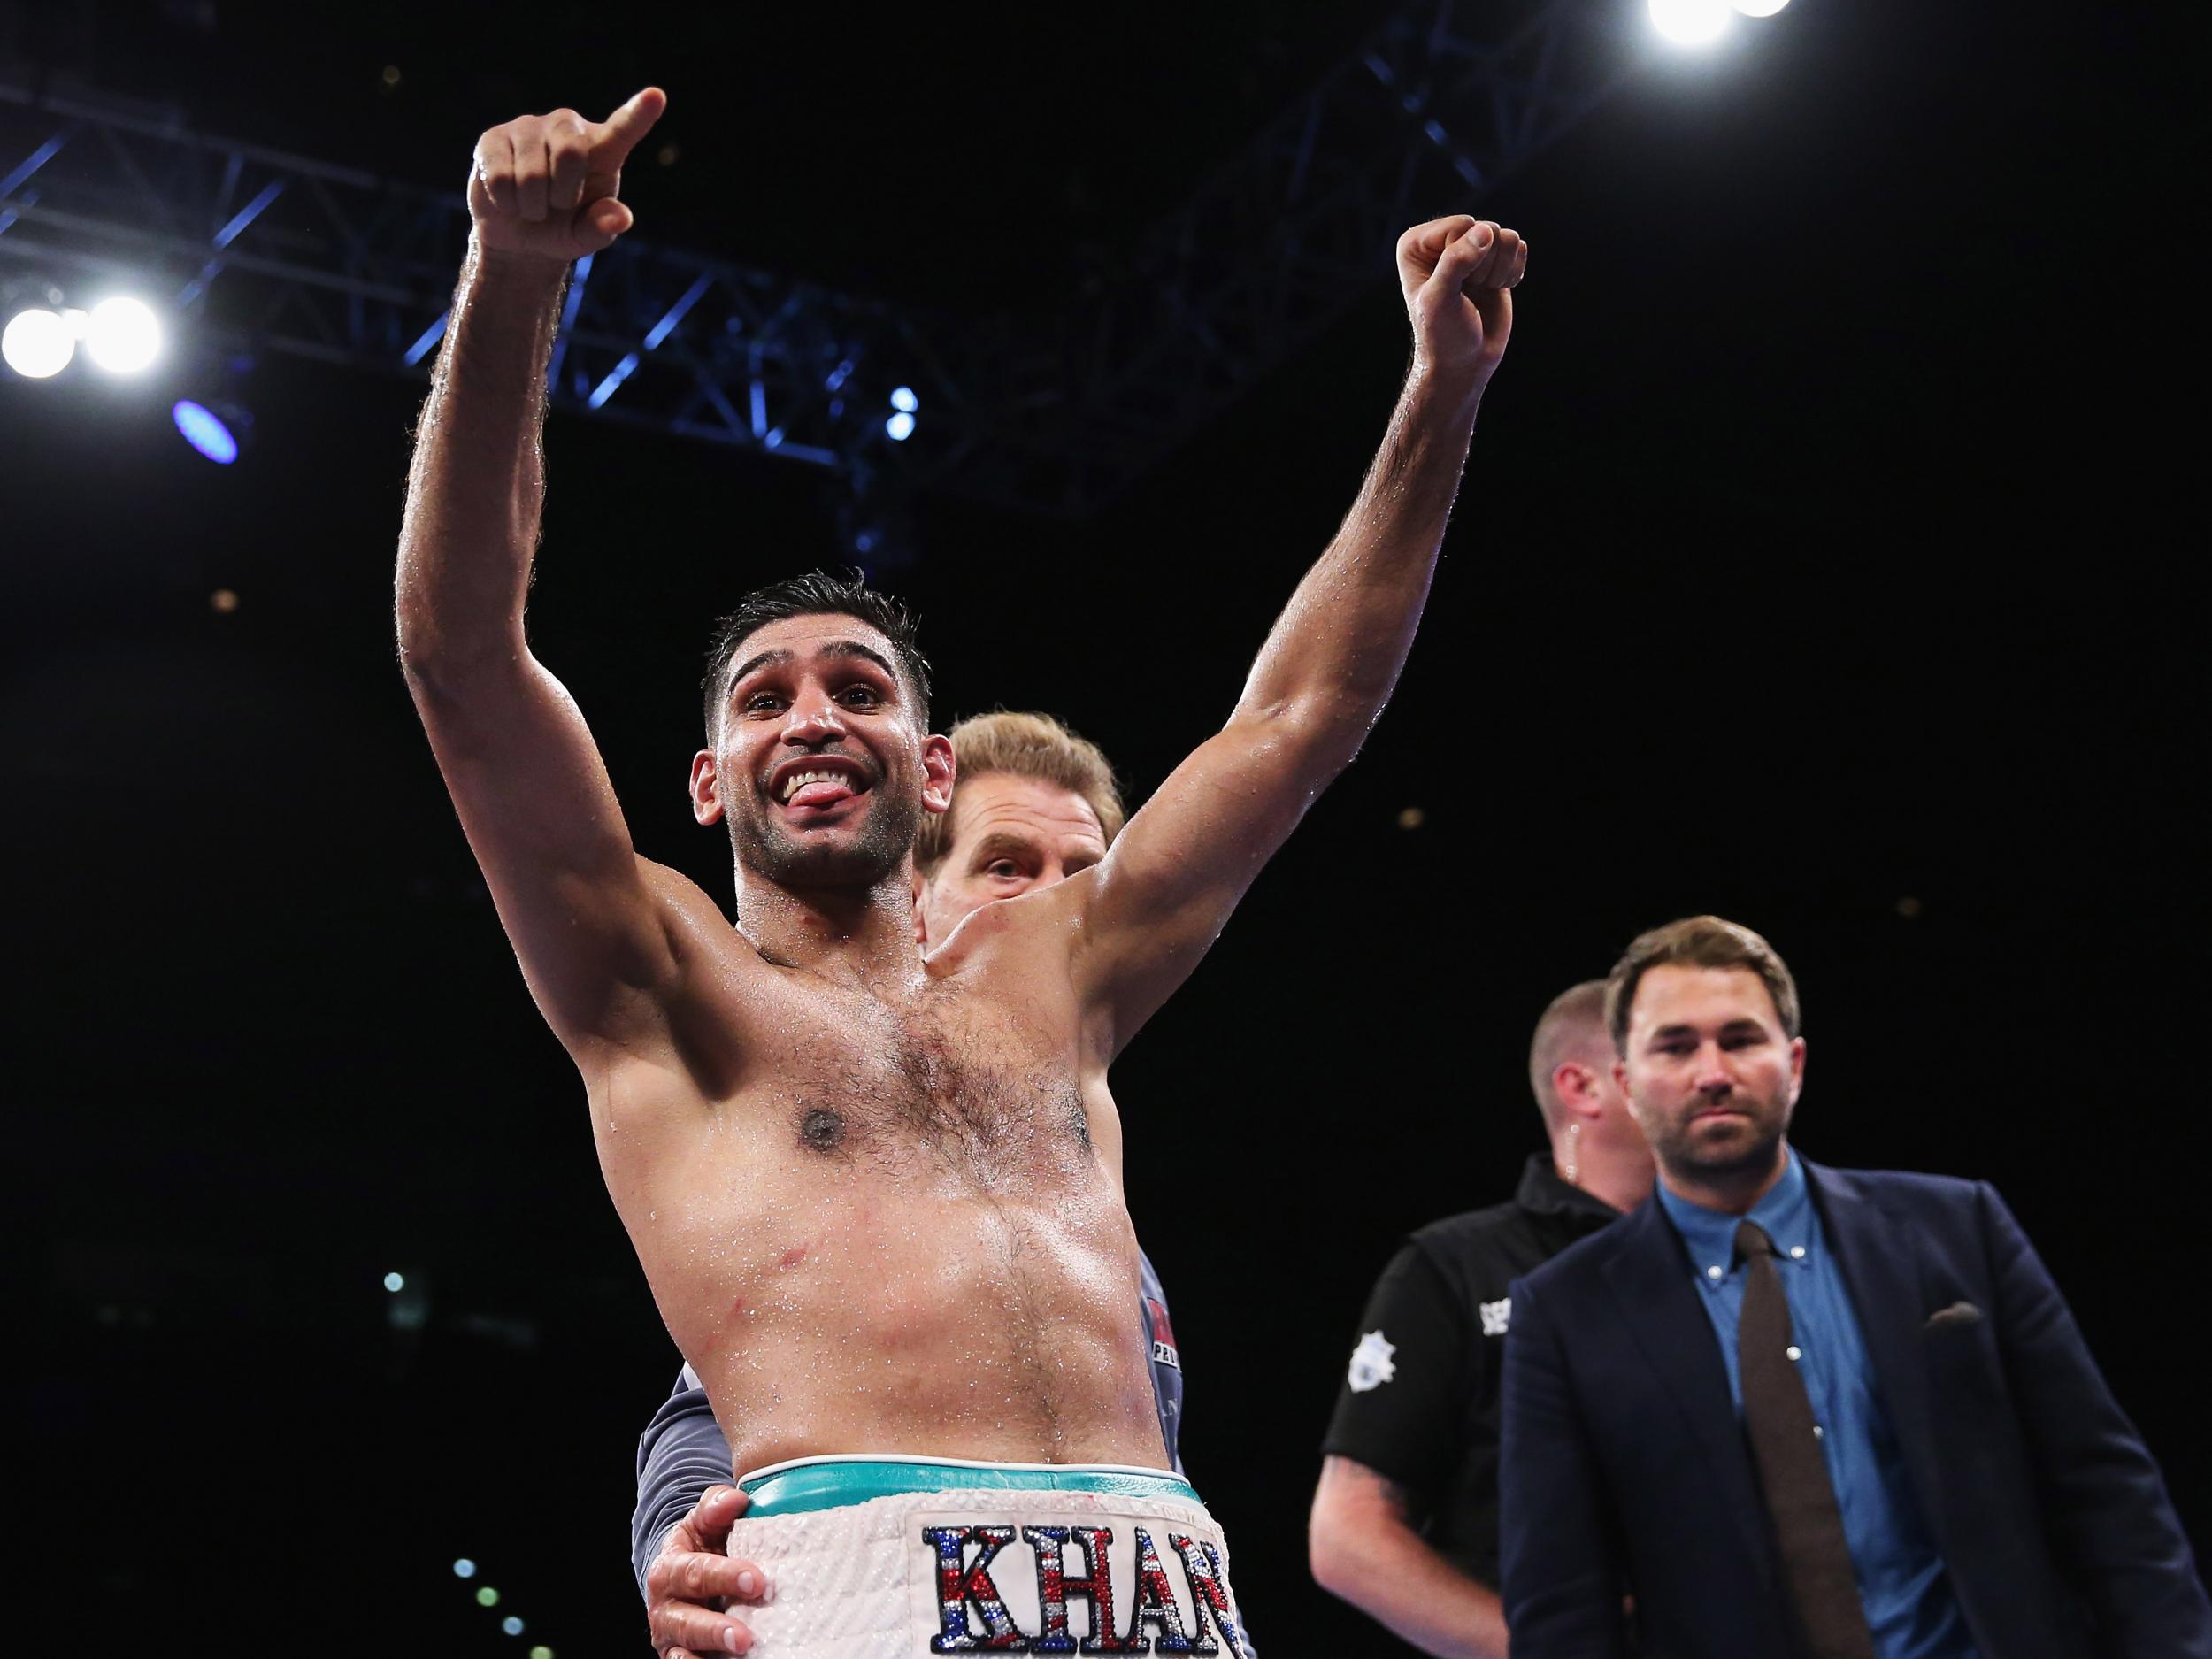 Khan survived an early knockdown to win on points